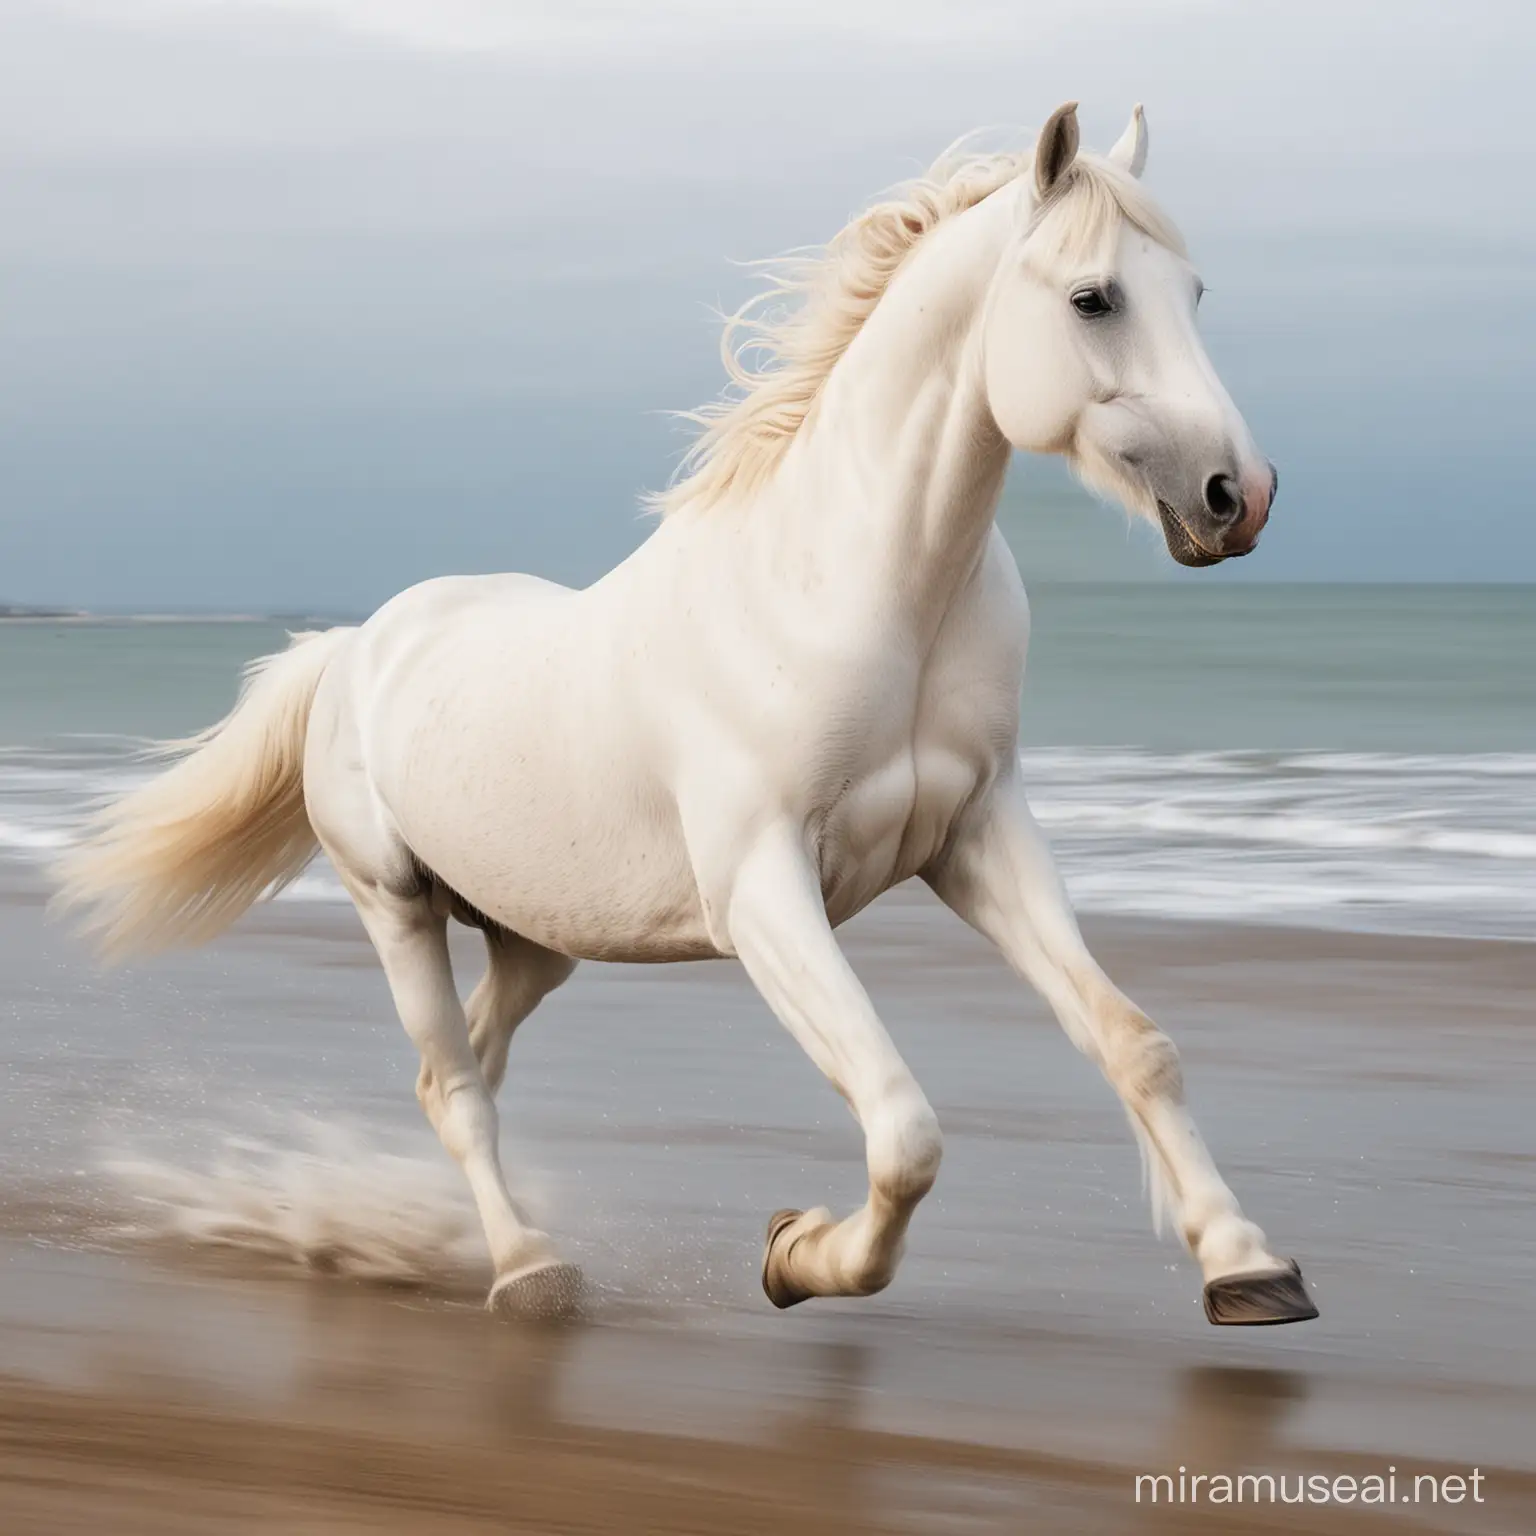 long exposure photography of a white horse running on a beach